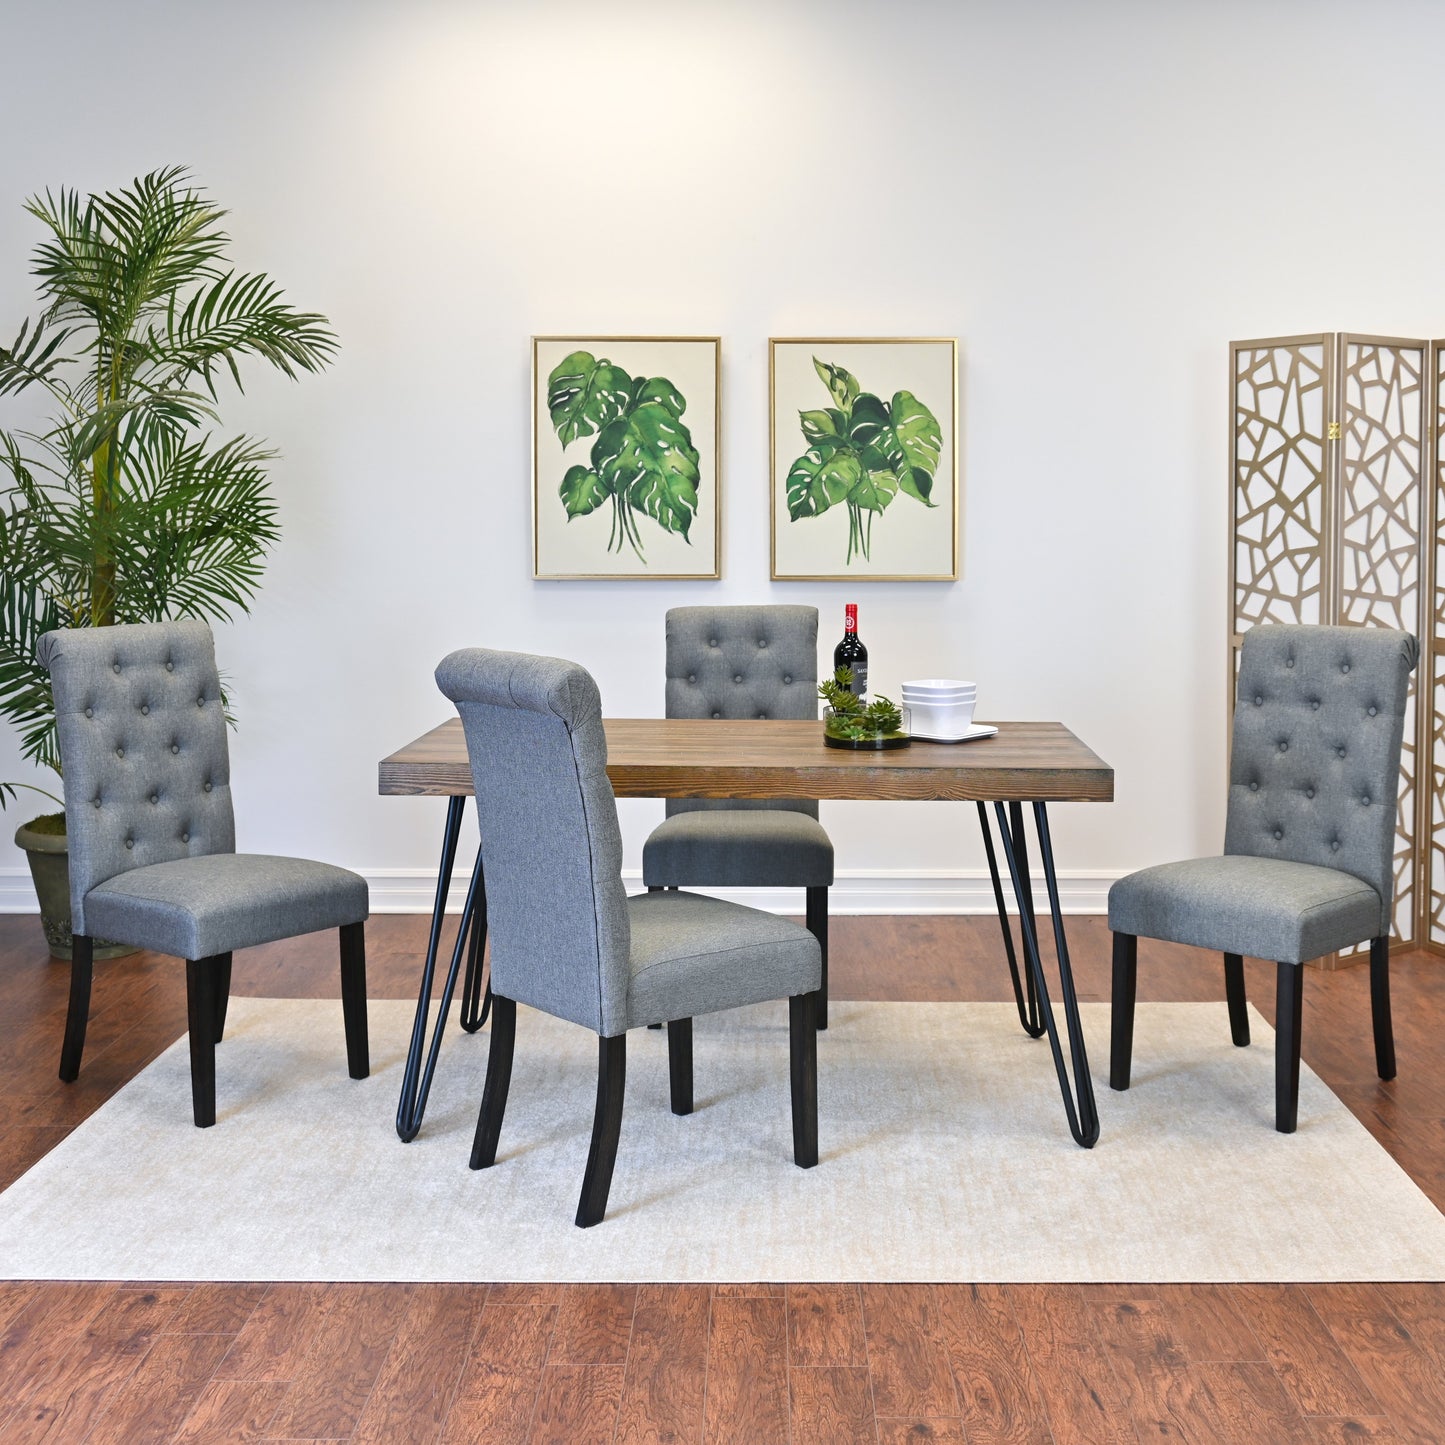 Ashford 5-Piece Dining Set, Hairpin Dining Table with 4 Chairs, 4 Color Options